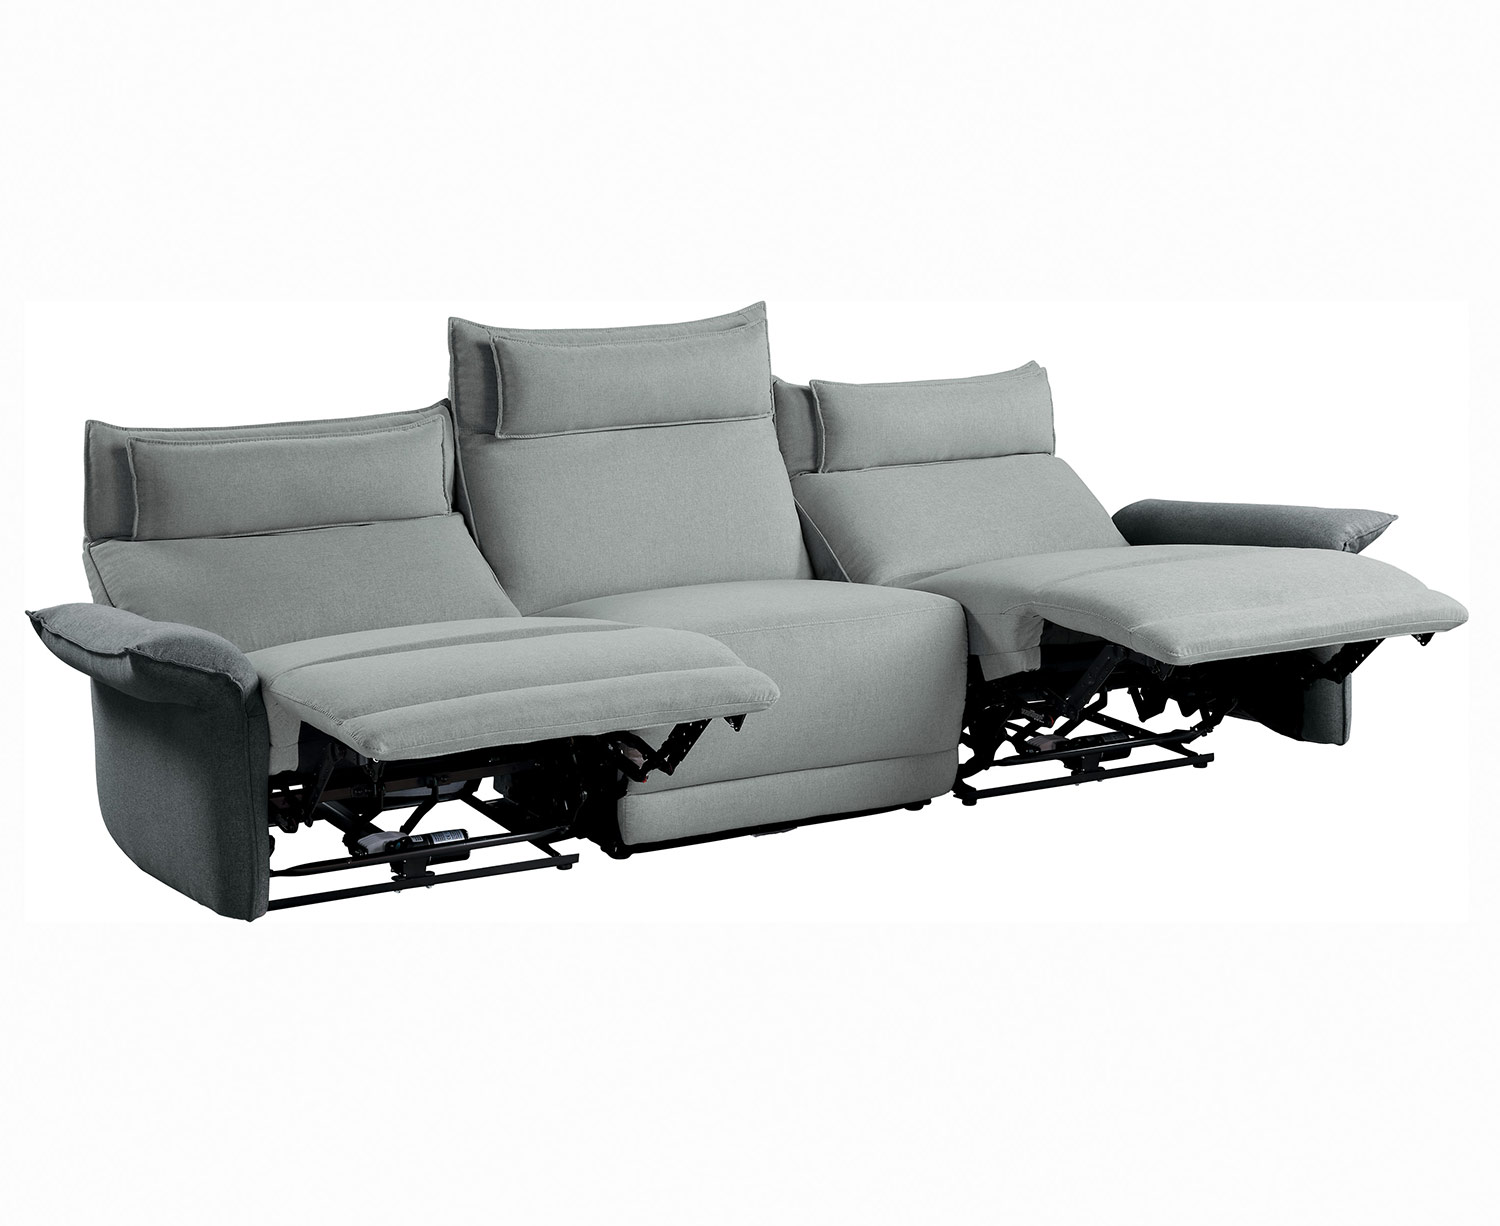 Homelegance Linette Power Double Reclining Sofa with Power Headrests - Gray